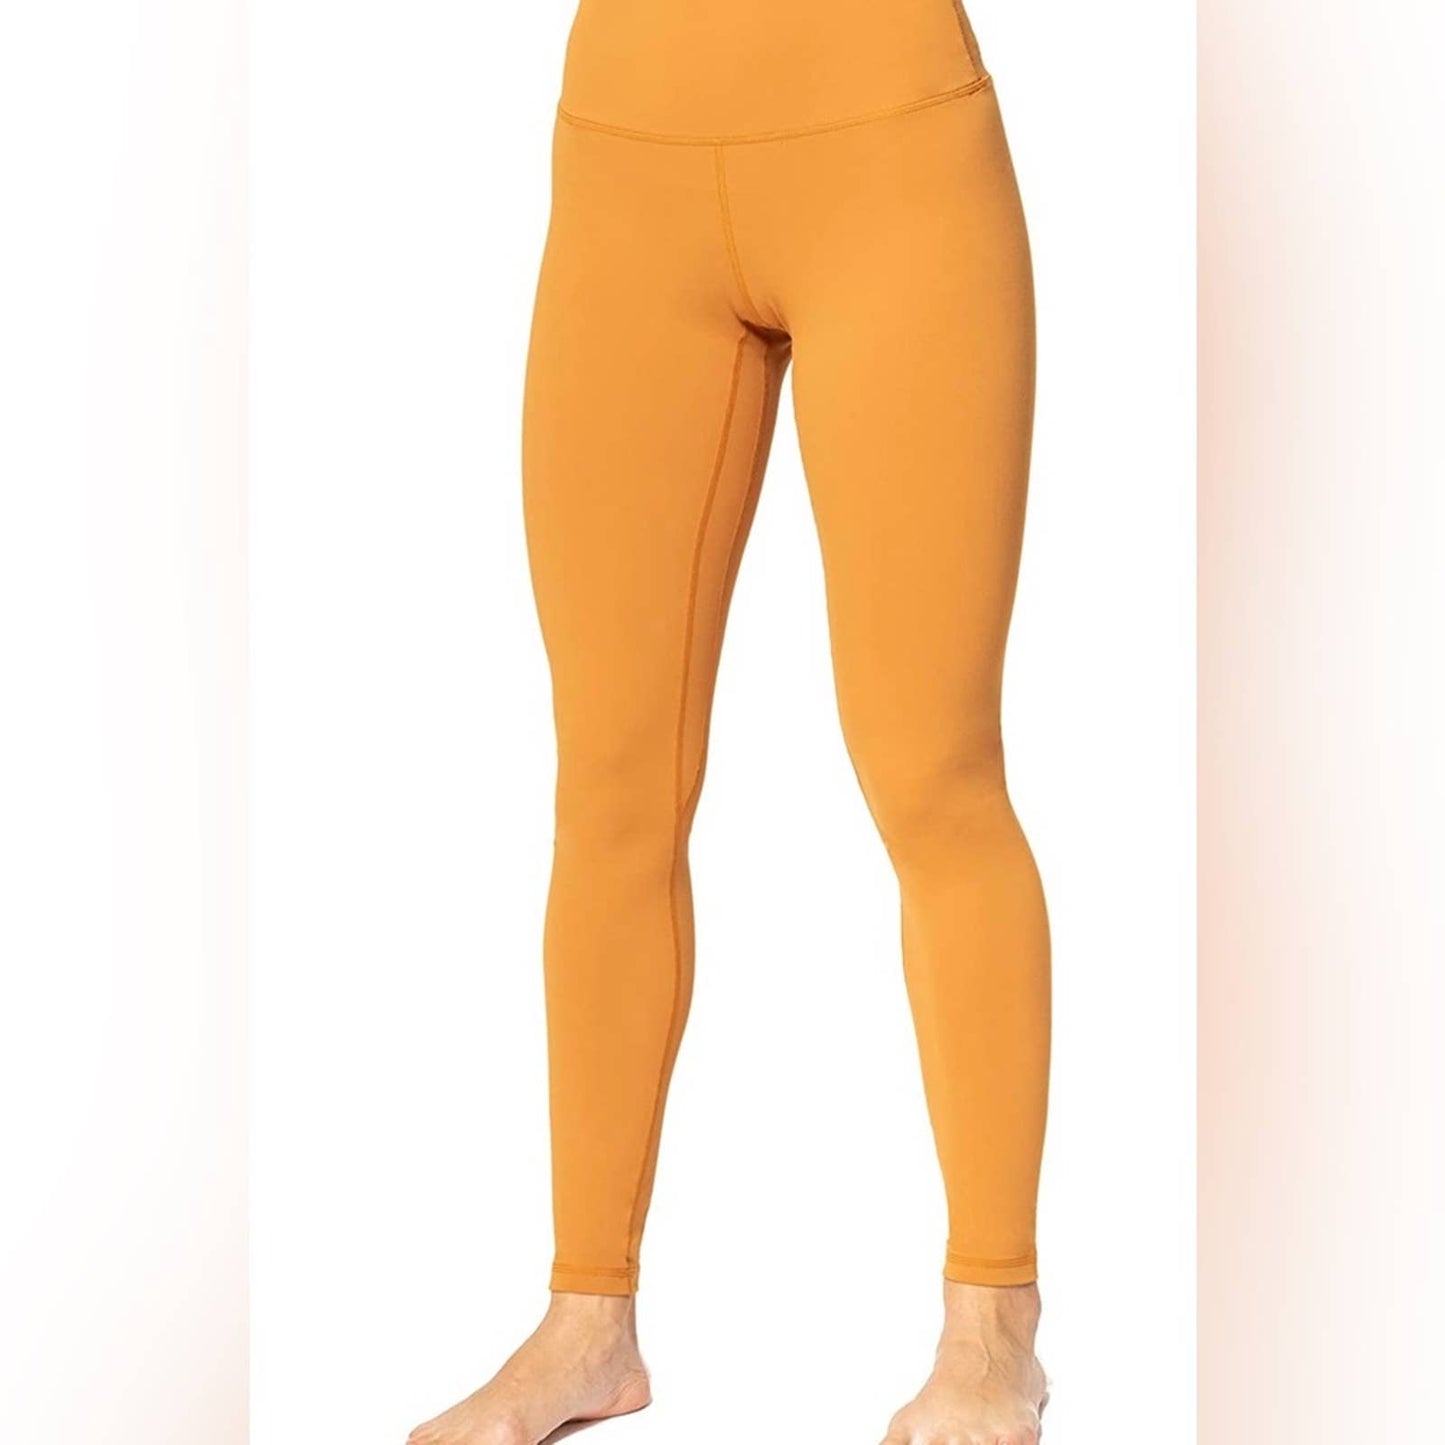 Sunzel Workout Leggings for Women, Squat Proof High Waisted Yoga, Buttery Soft MD